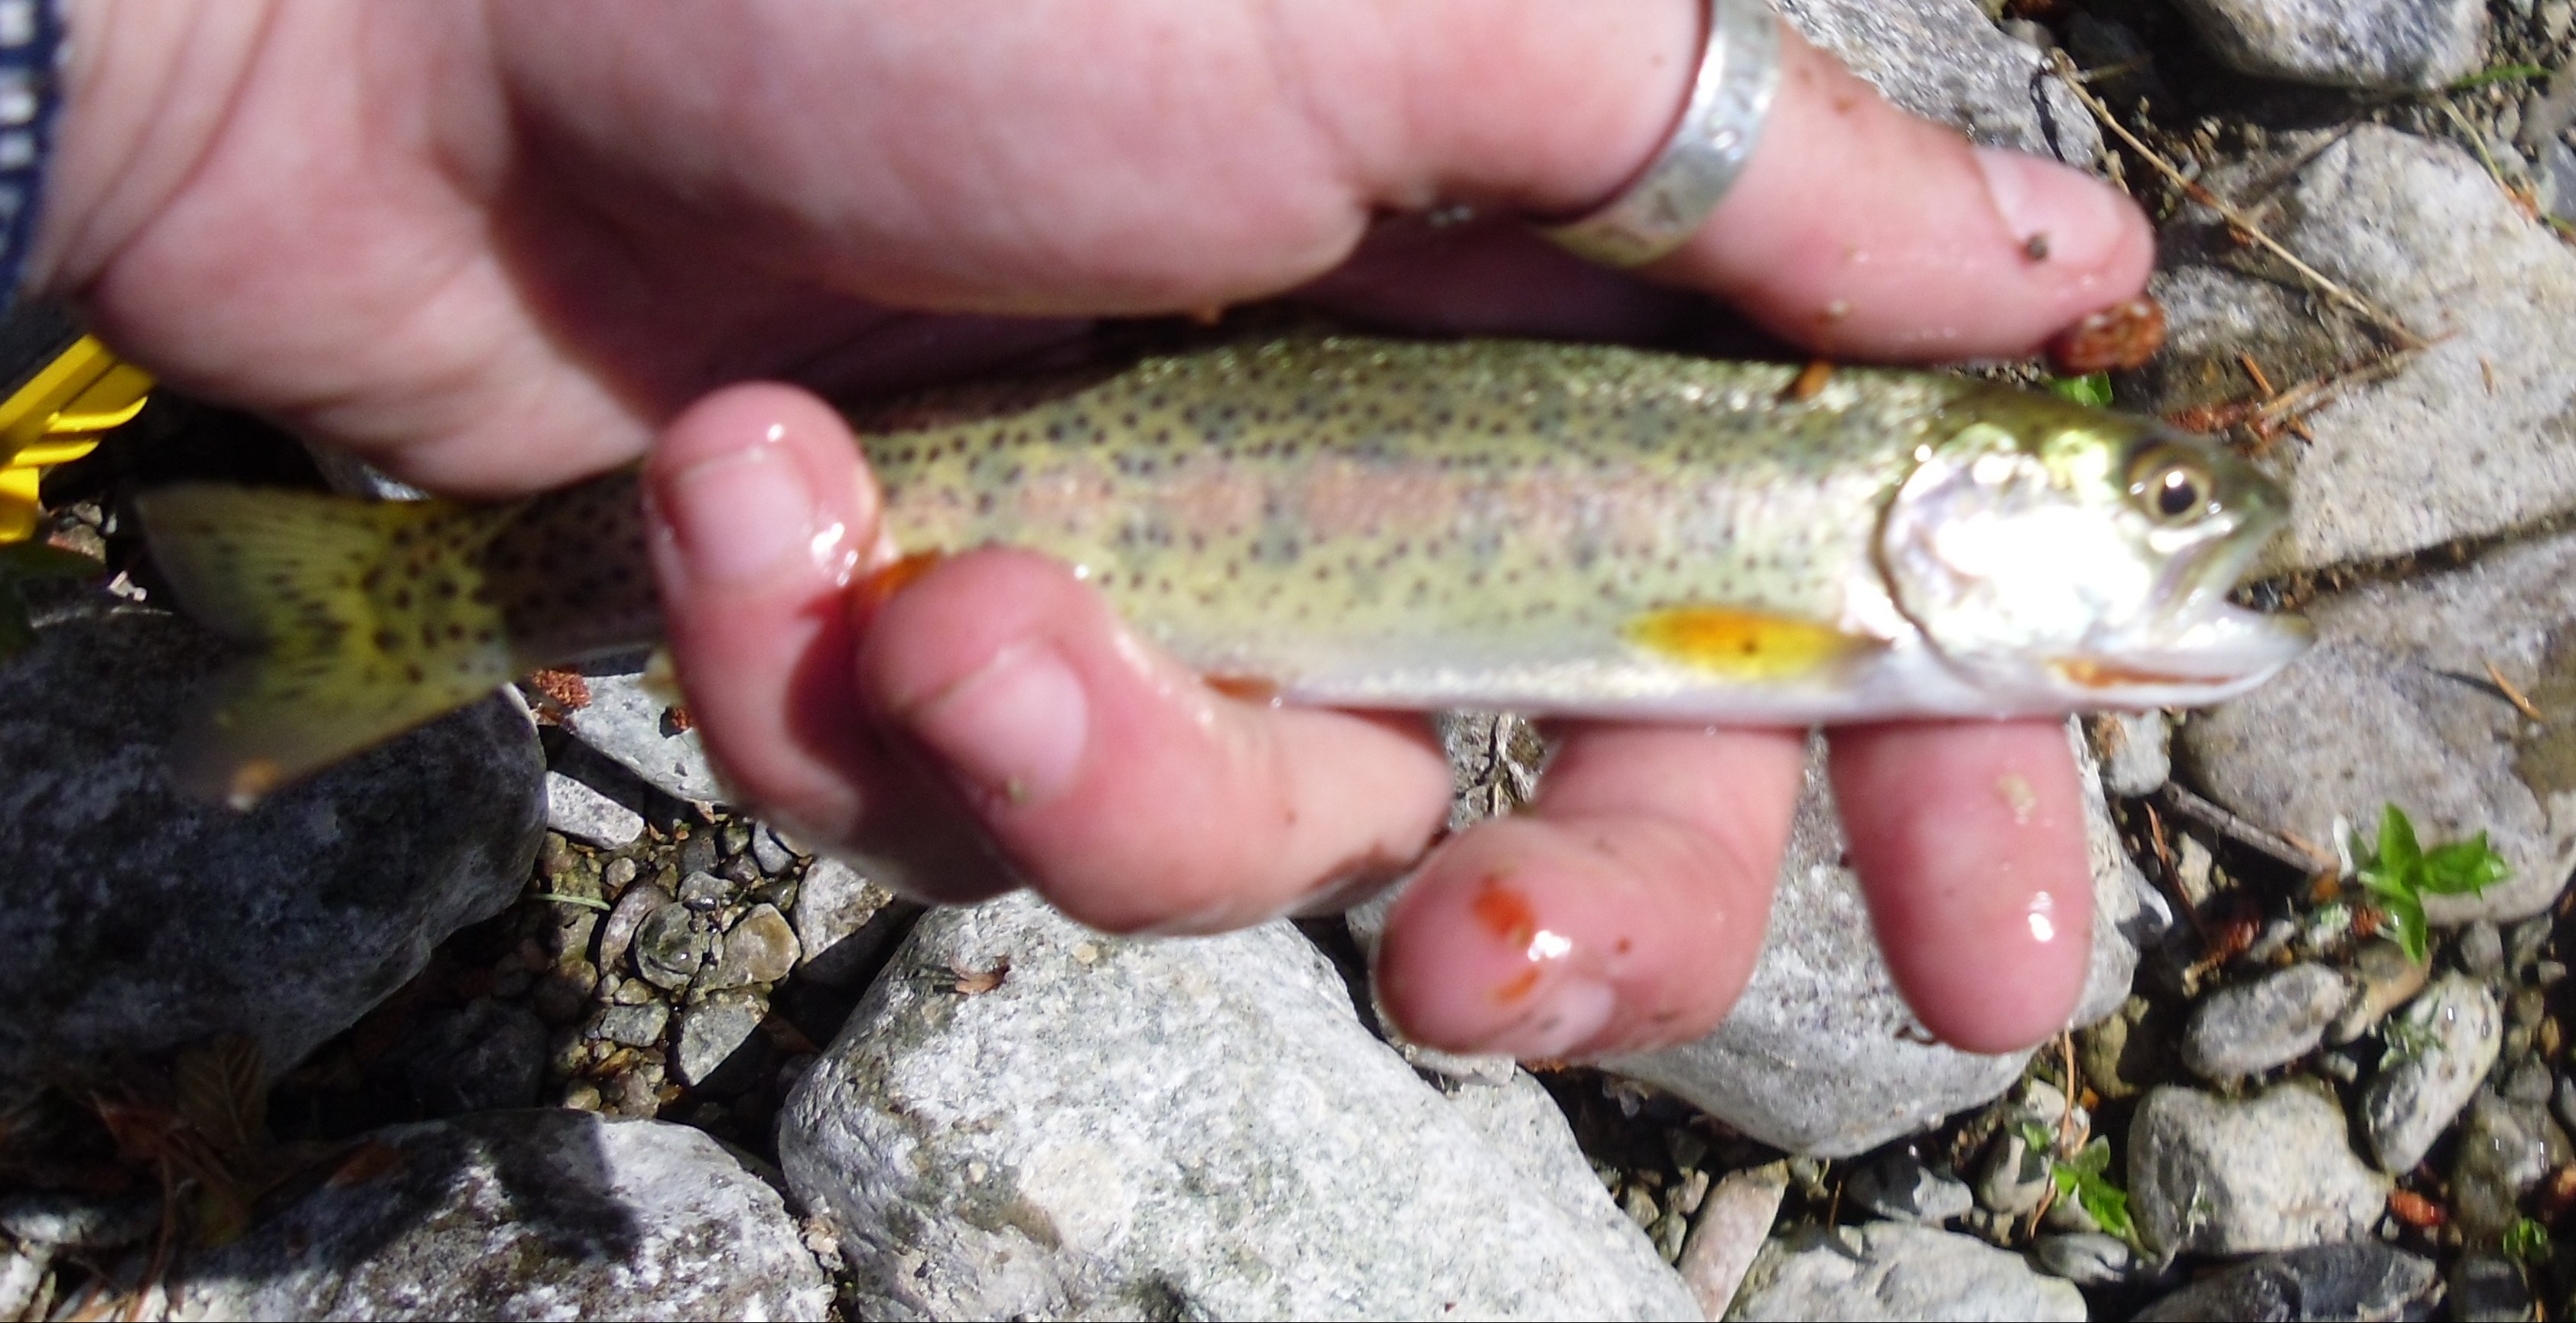 sea-run-cutthroat-trout-with-the-namesake-red-slash-on-the-jaw-are-typically-smaller-fish-reaching-up-to-6lbs.-e1565384701451.jpg